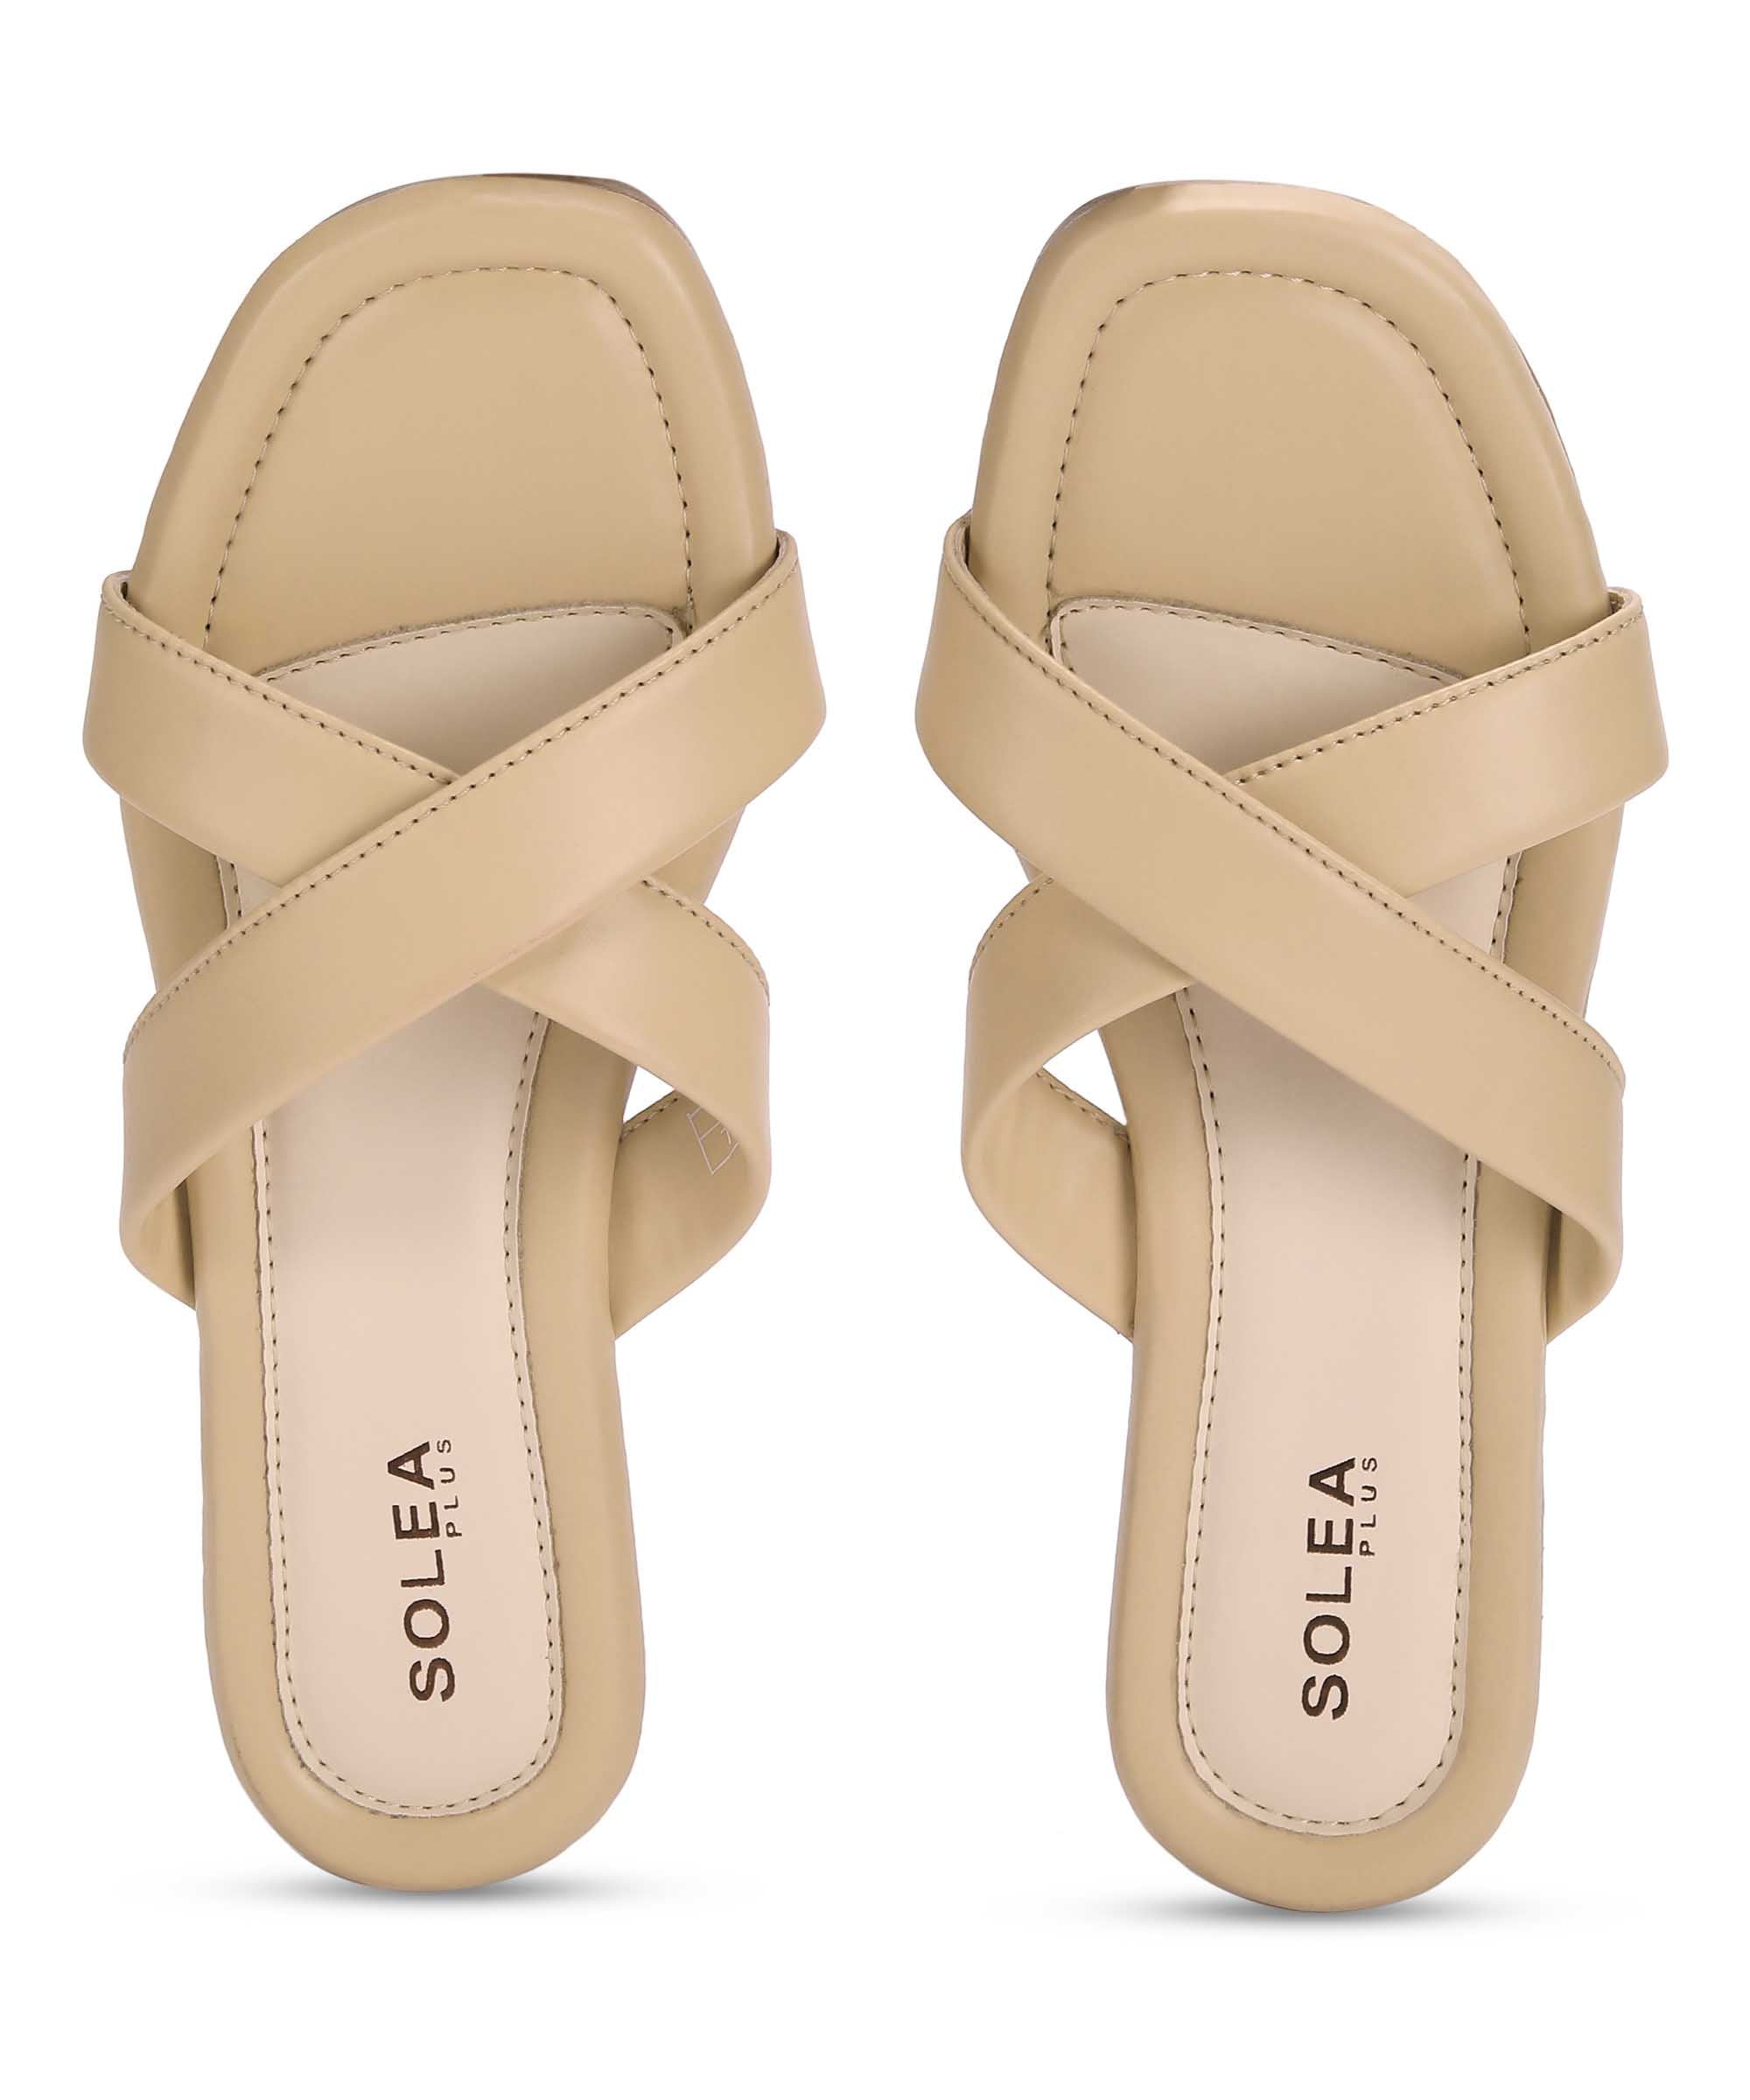 Paragon K6016L Women Sandals | Casual &amp; Formal Sandals | Stylish, Comfortable &amp; Durable | For Daily &amp; Occasion Wear